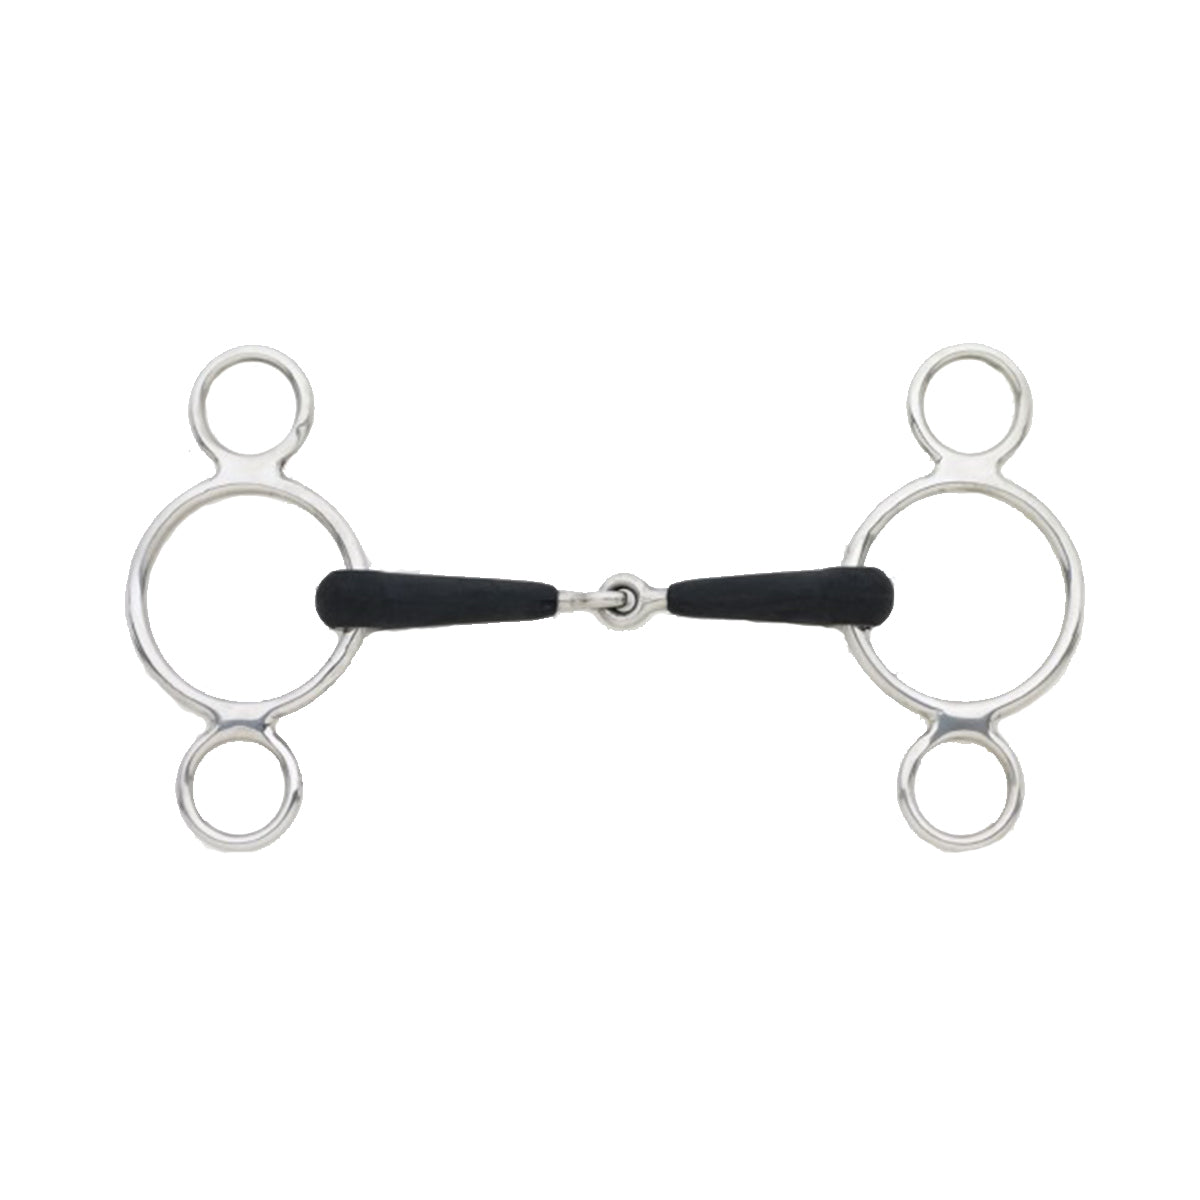 Centaur Eco Pure 2 Ring Gag Jointed Bit